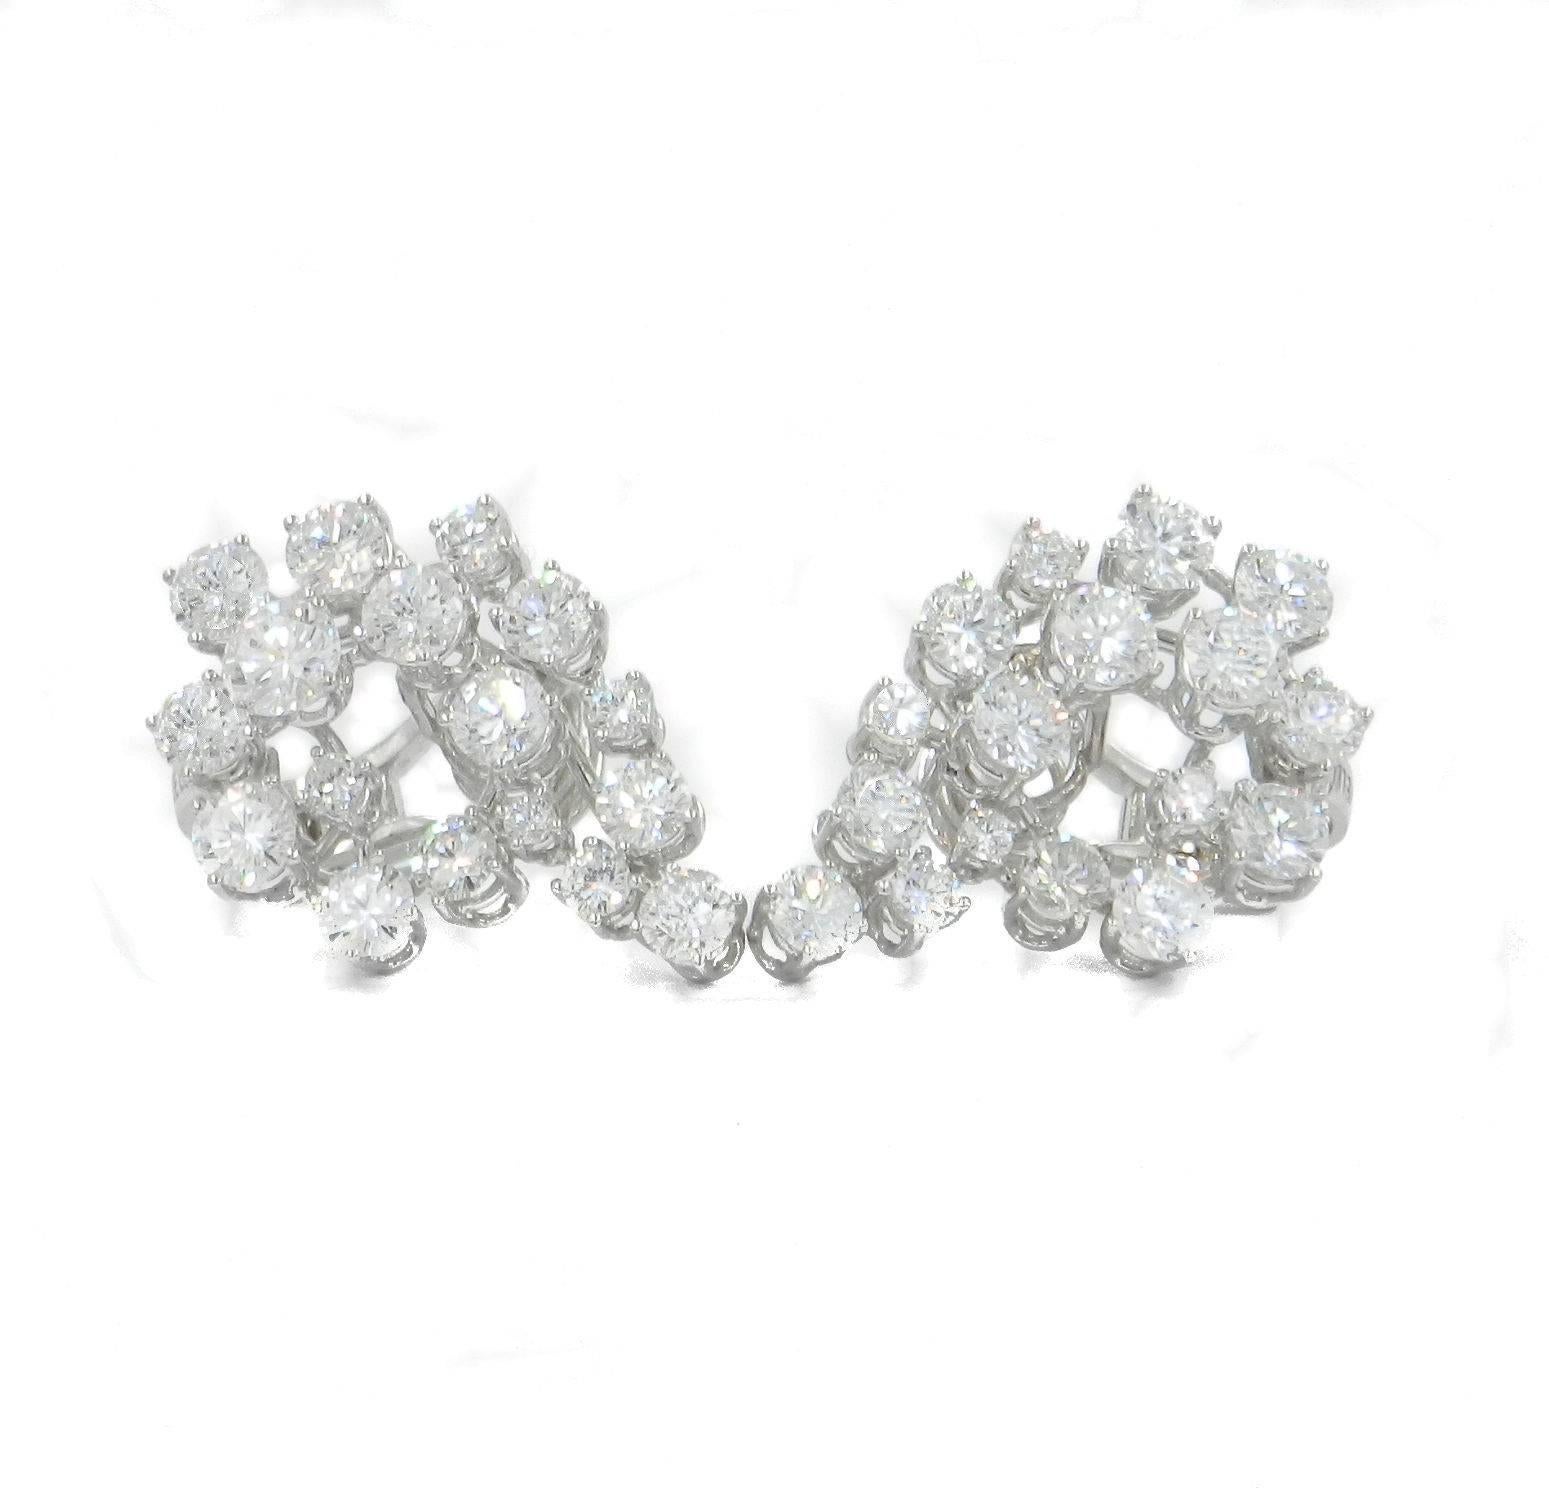 Hand made earrings with beautiful white diamonds in different sizes total carat weight 6.66, all shaped to create the letter G from the first owner name. Period 1960. Made In Italy